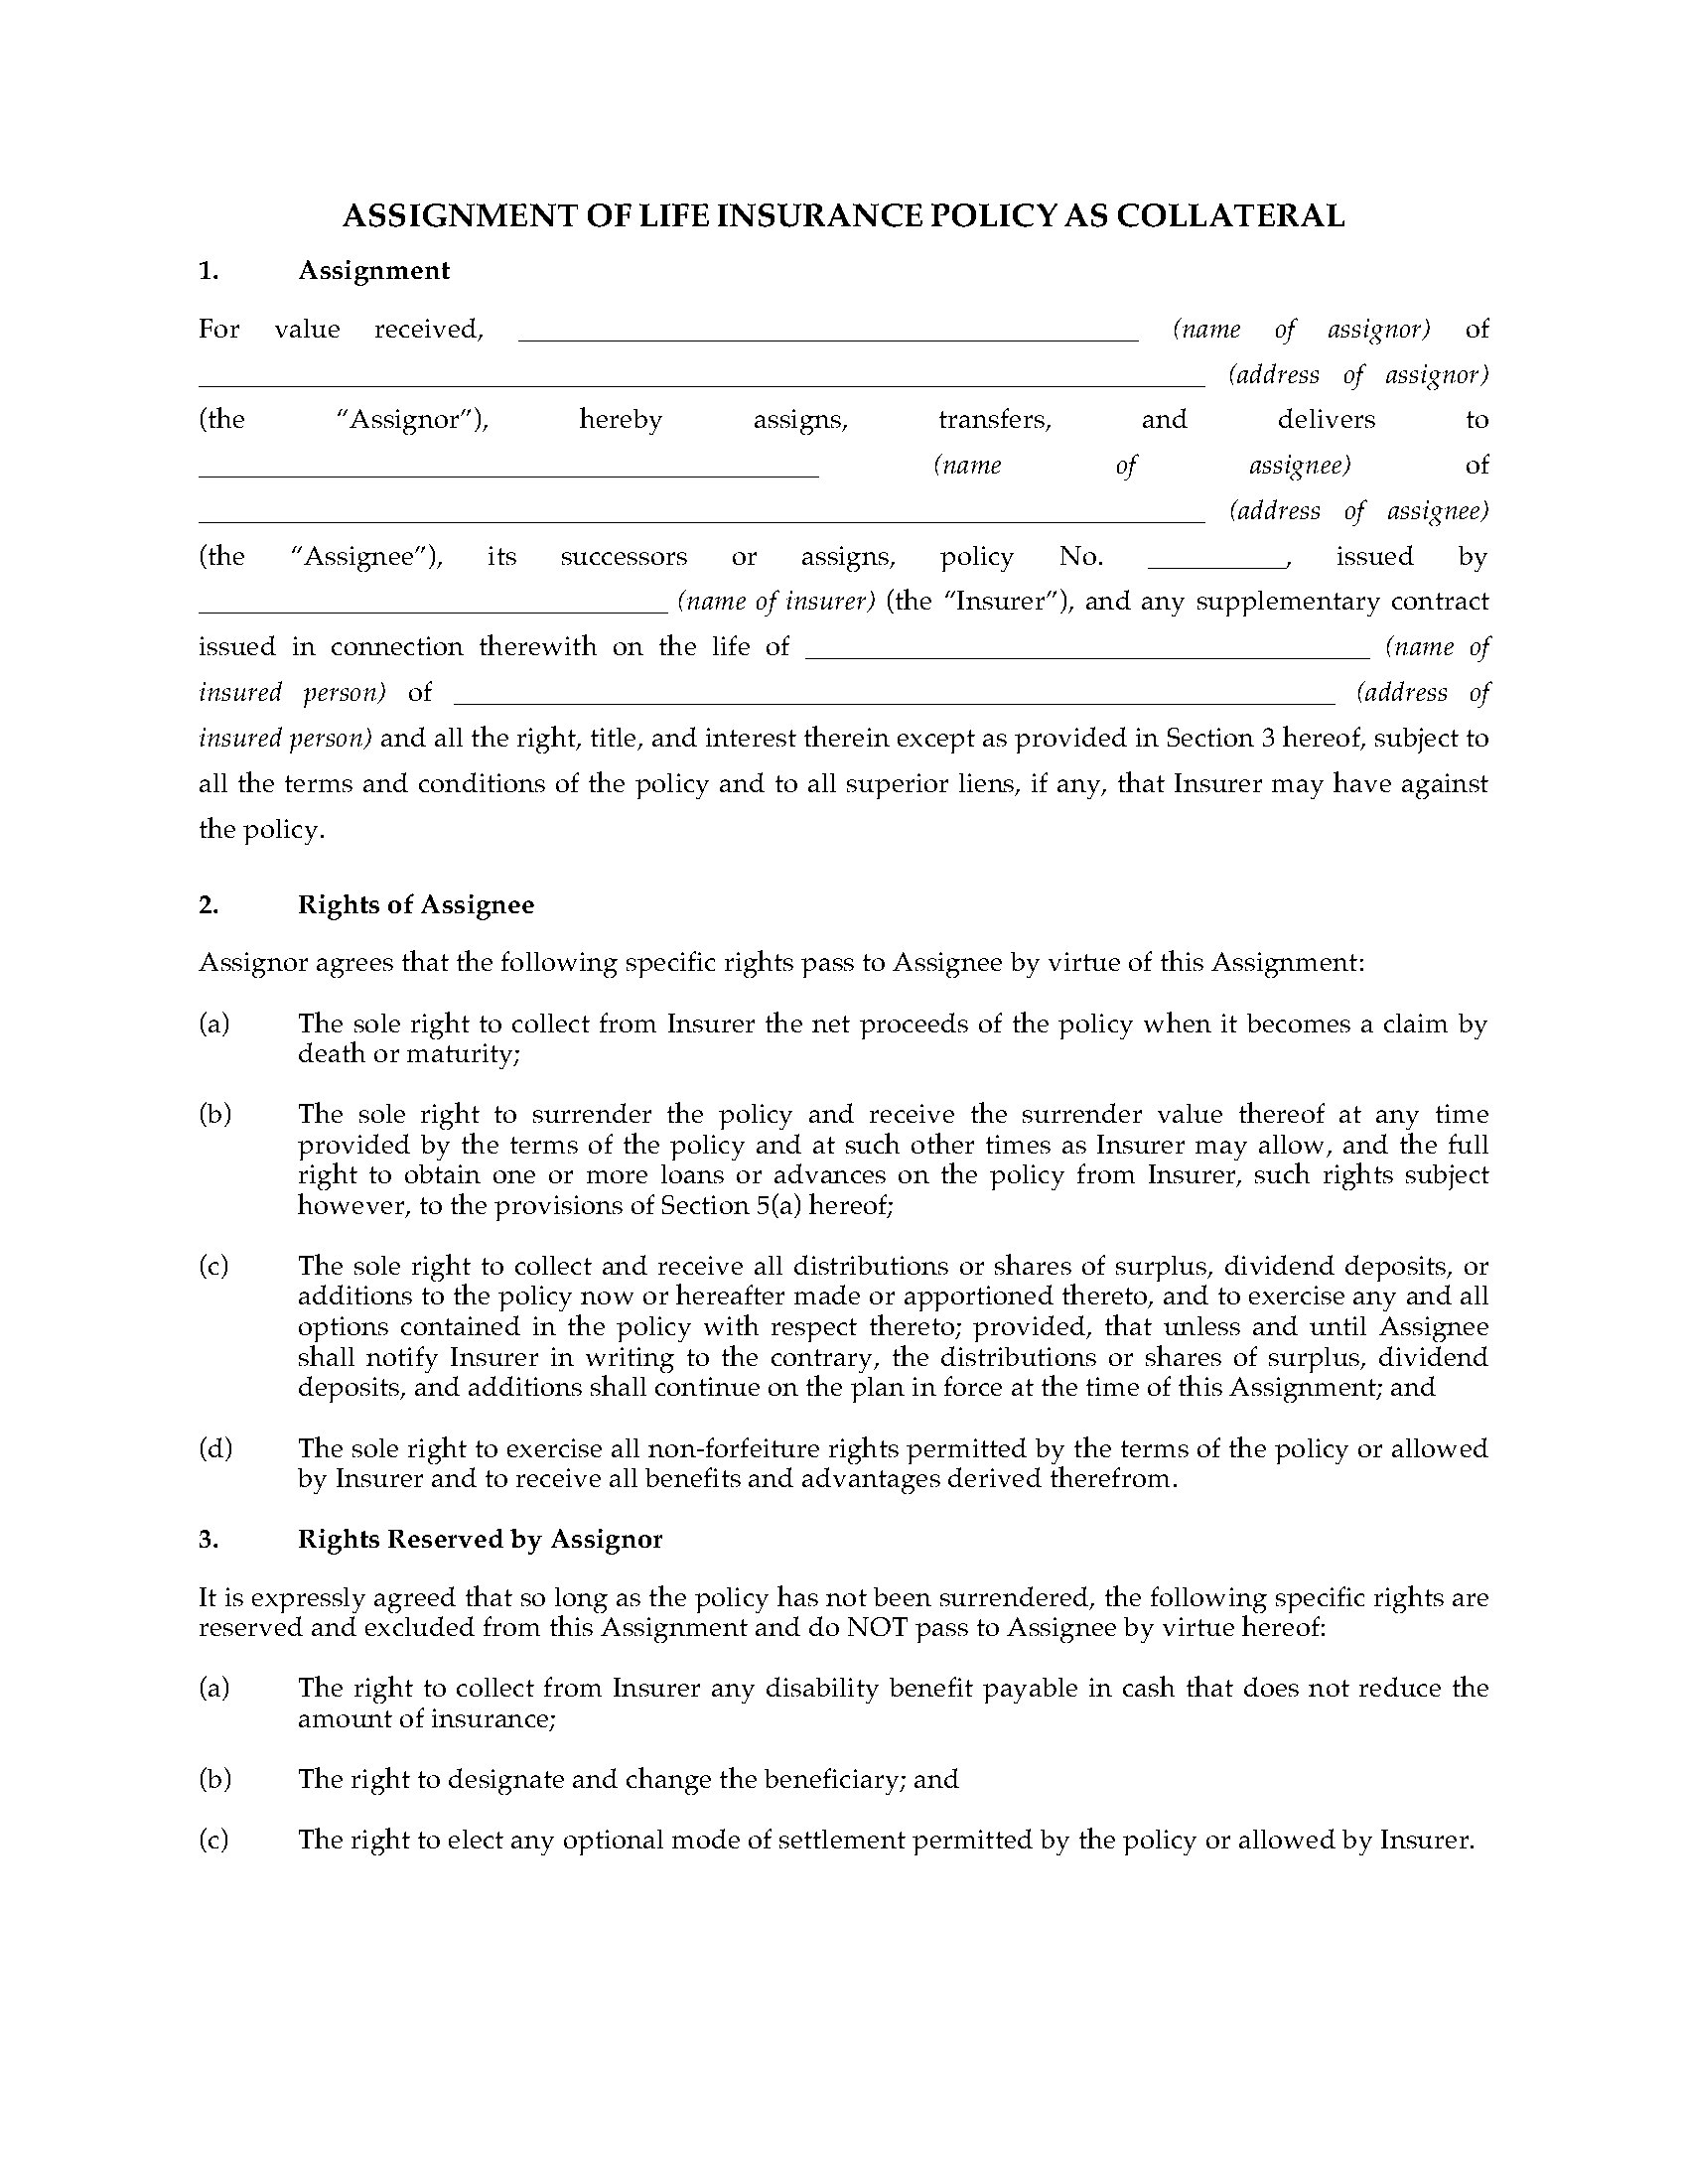 legal assignment of insurance policy